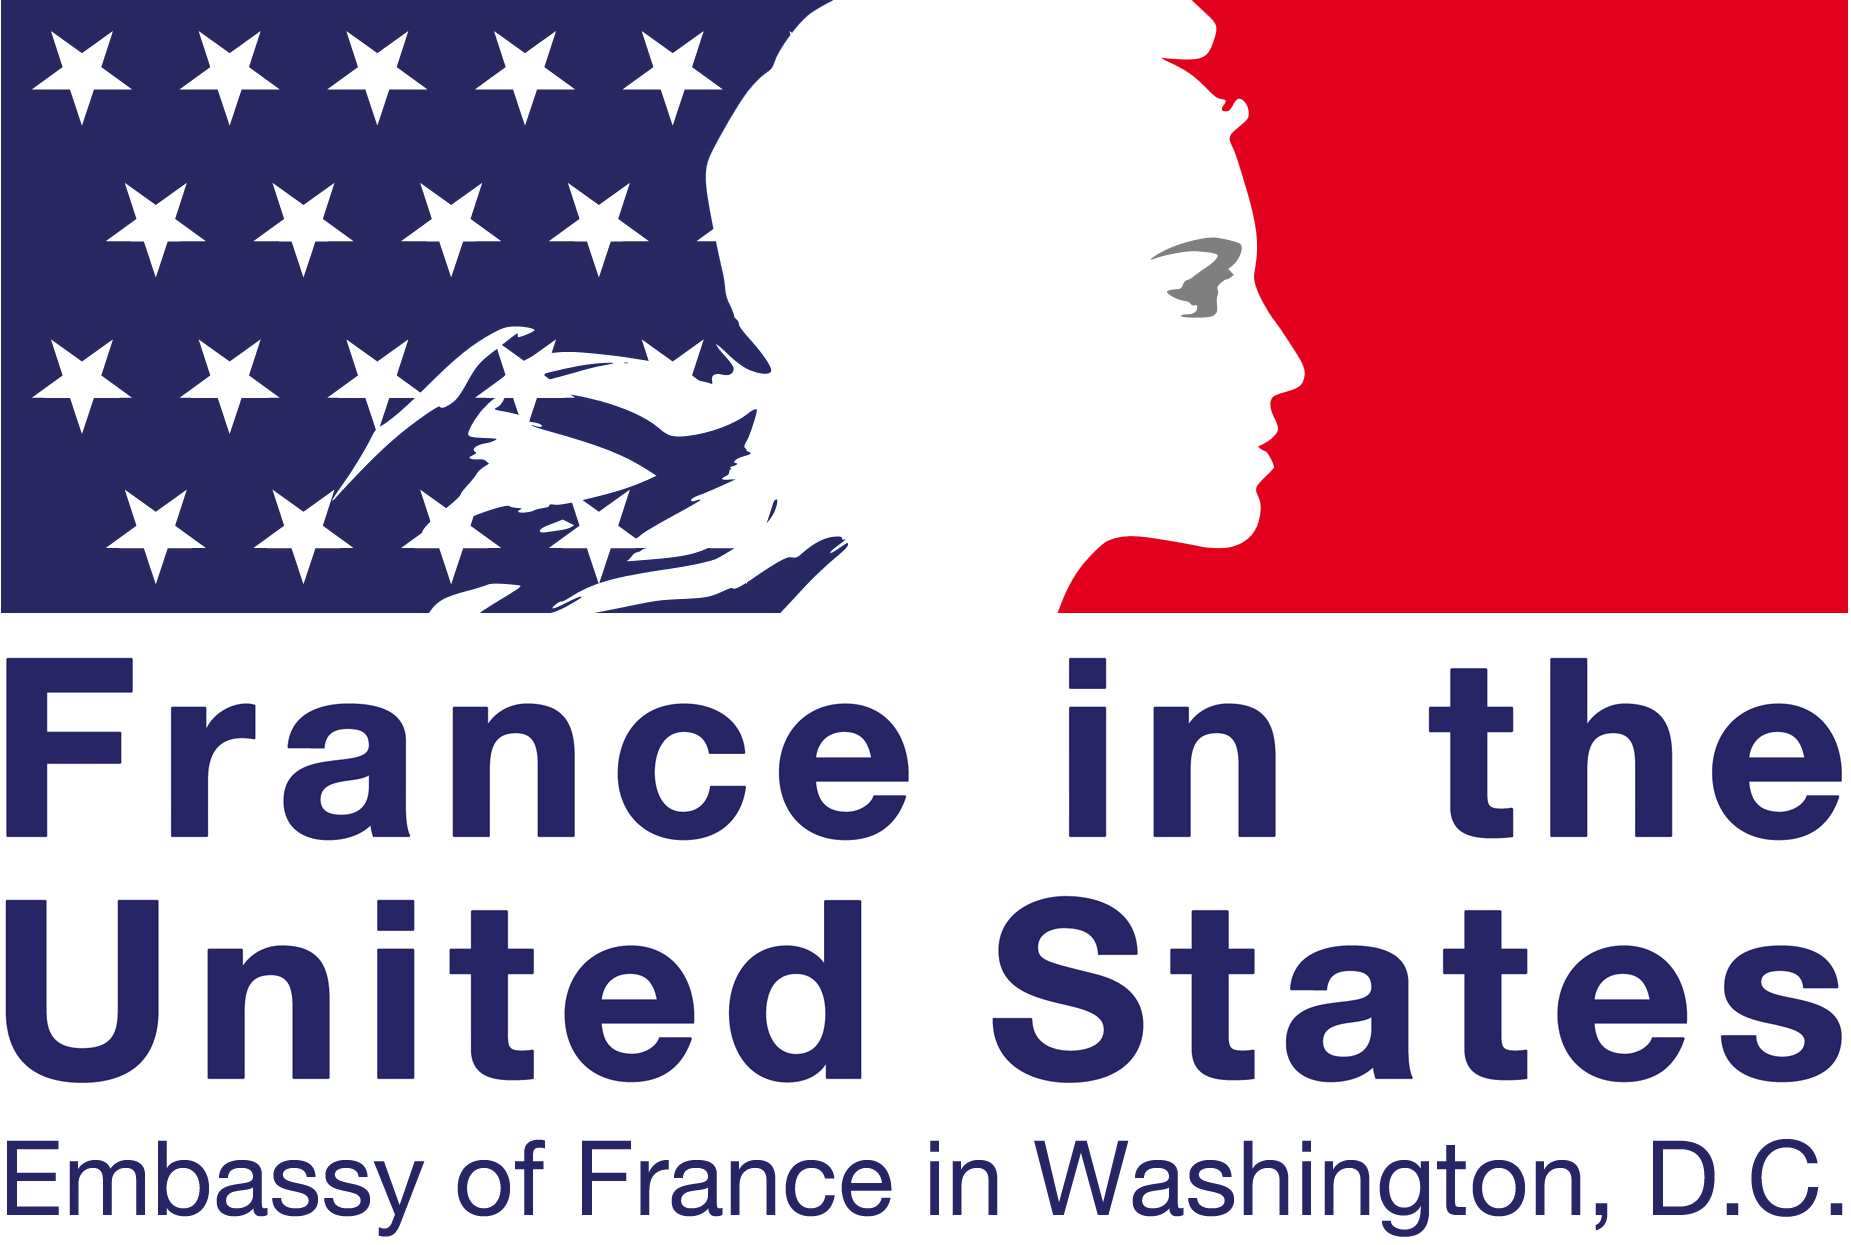 Red white and blue squared logo with side view of face and text saying France in the United States.